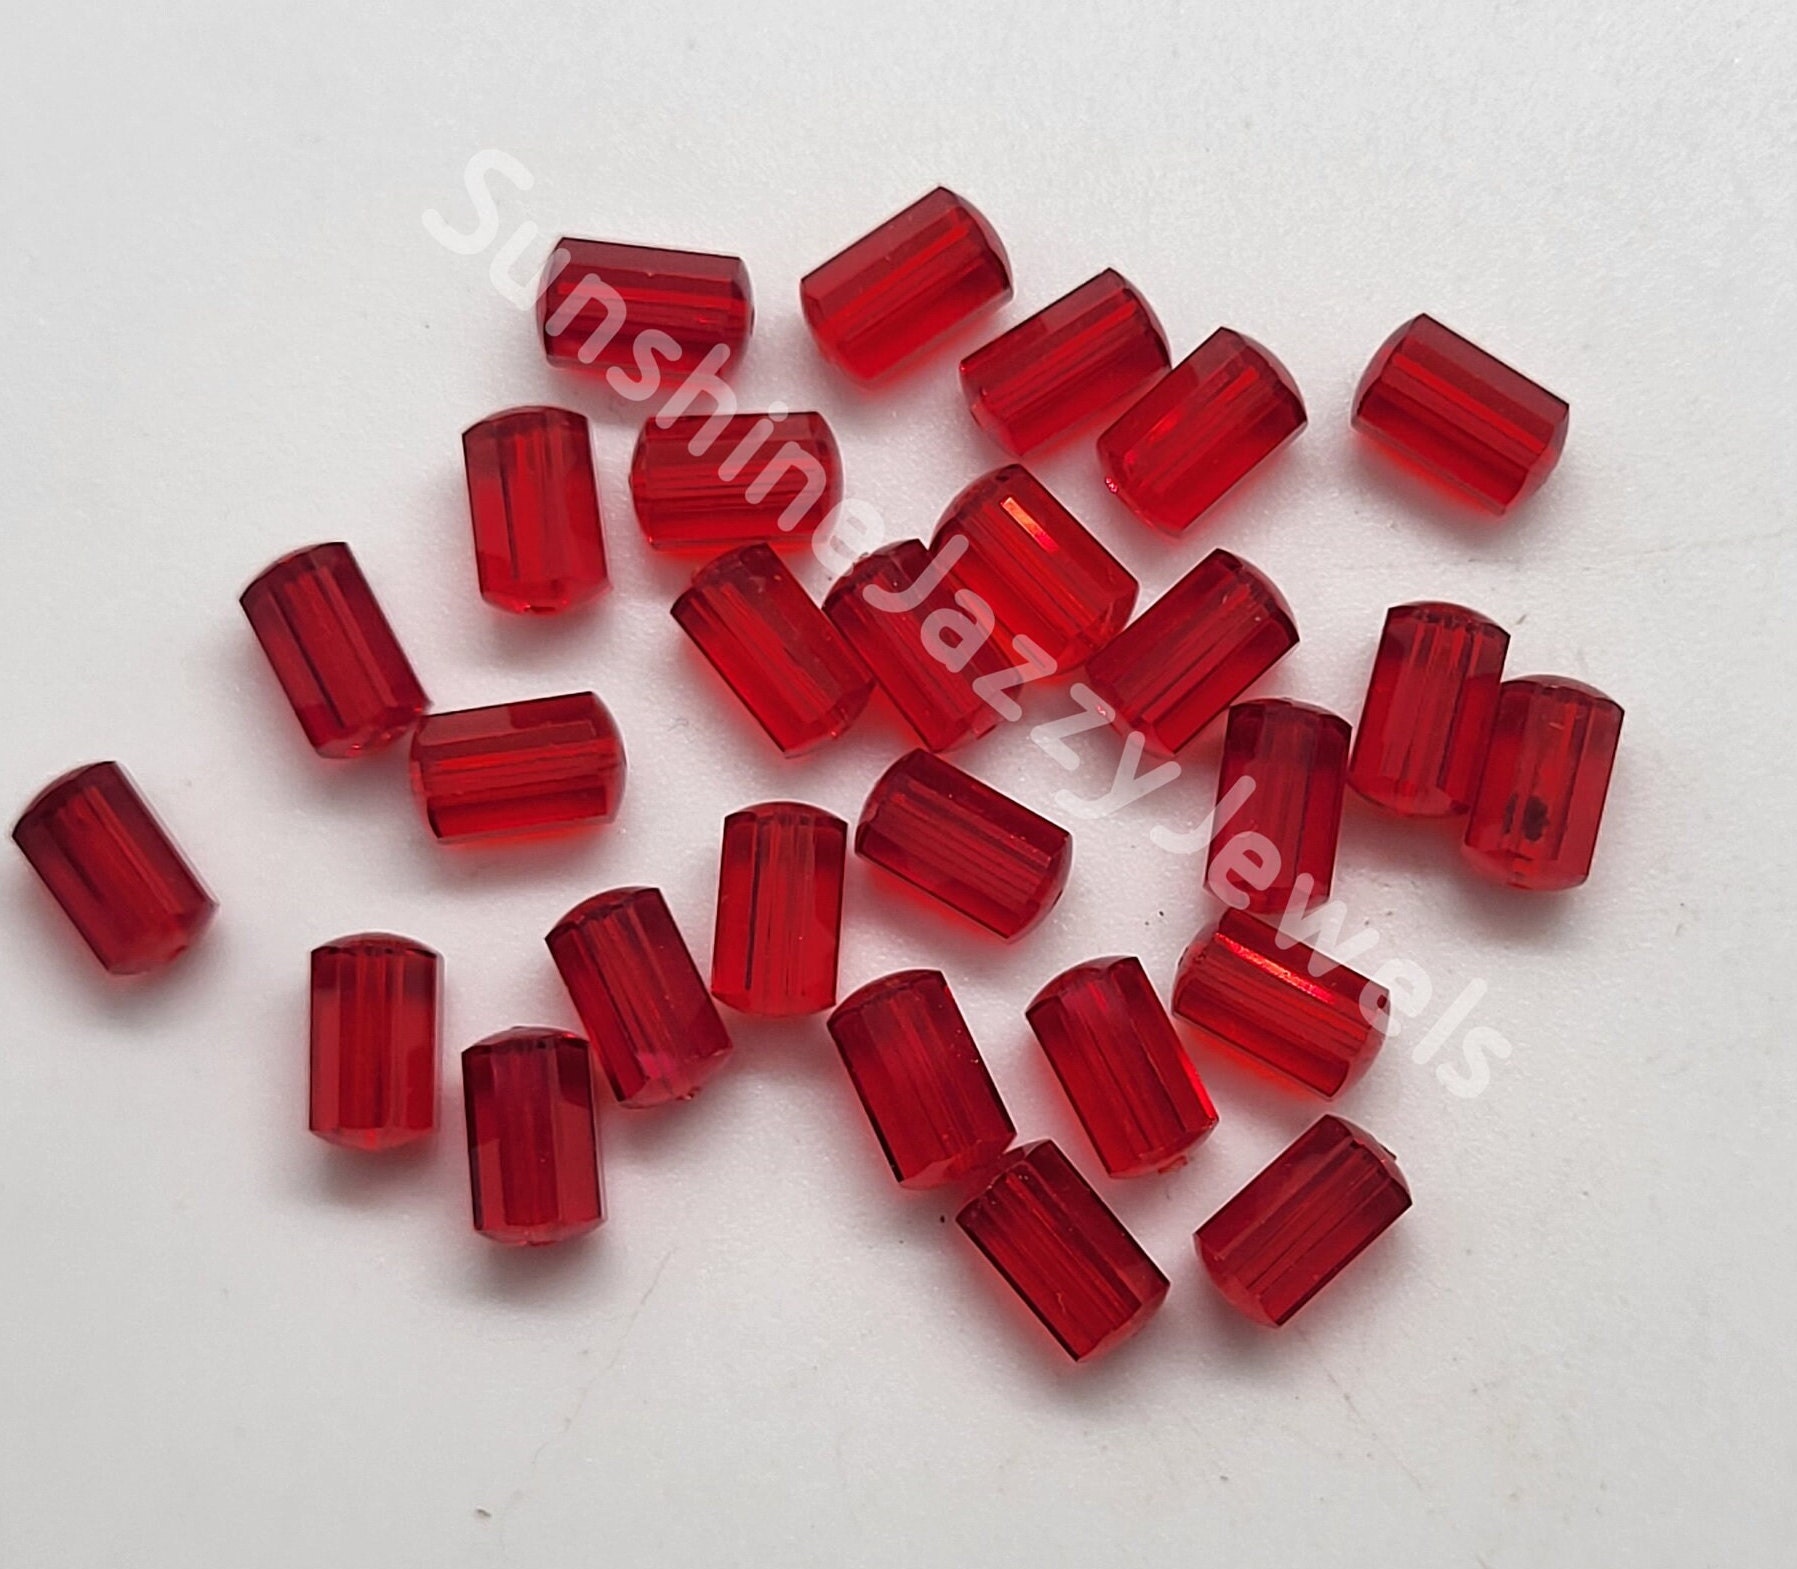 Siam 5310 Red Swarovski Crystal Faceted Simplicity Beads 